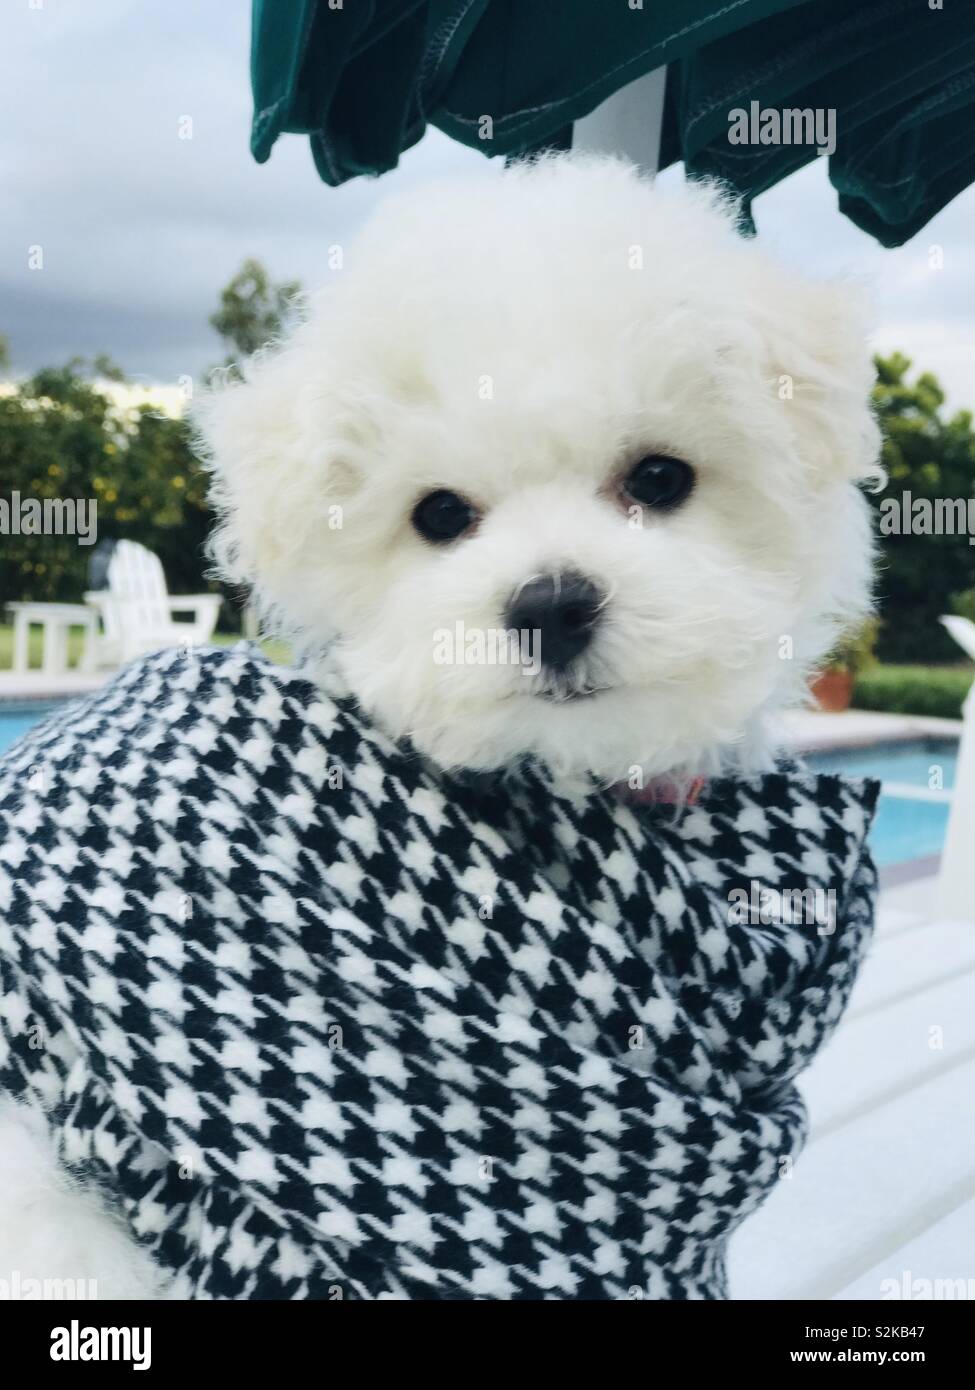 Teddy Pup wearing houndstooth Scottish scarf outdoors on stormy day poolside Stock Photo